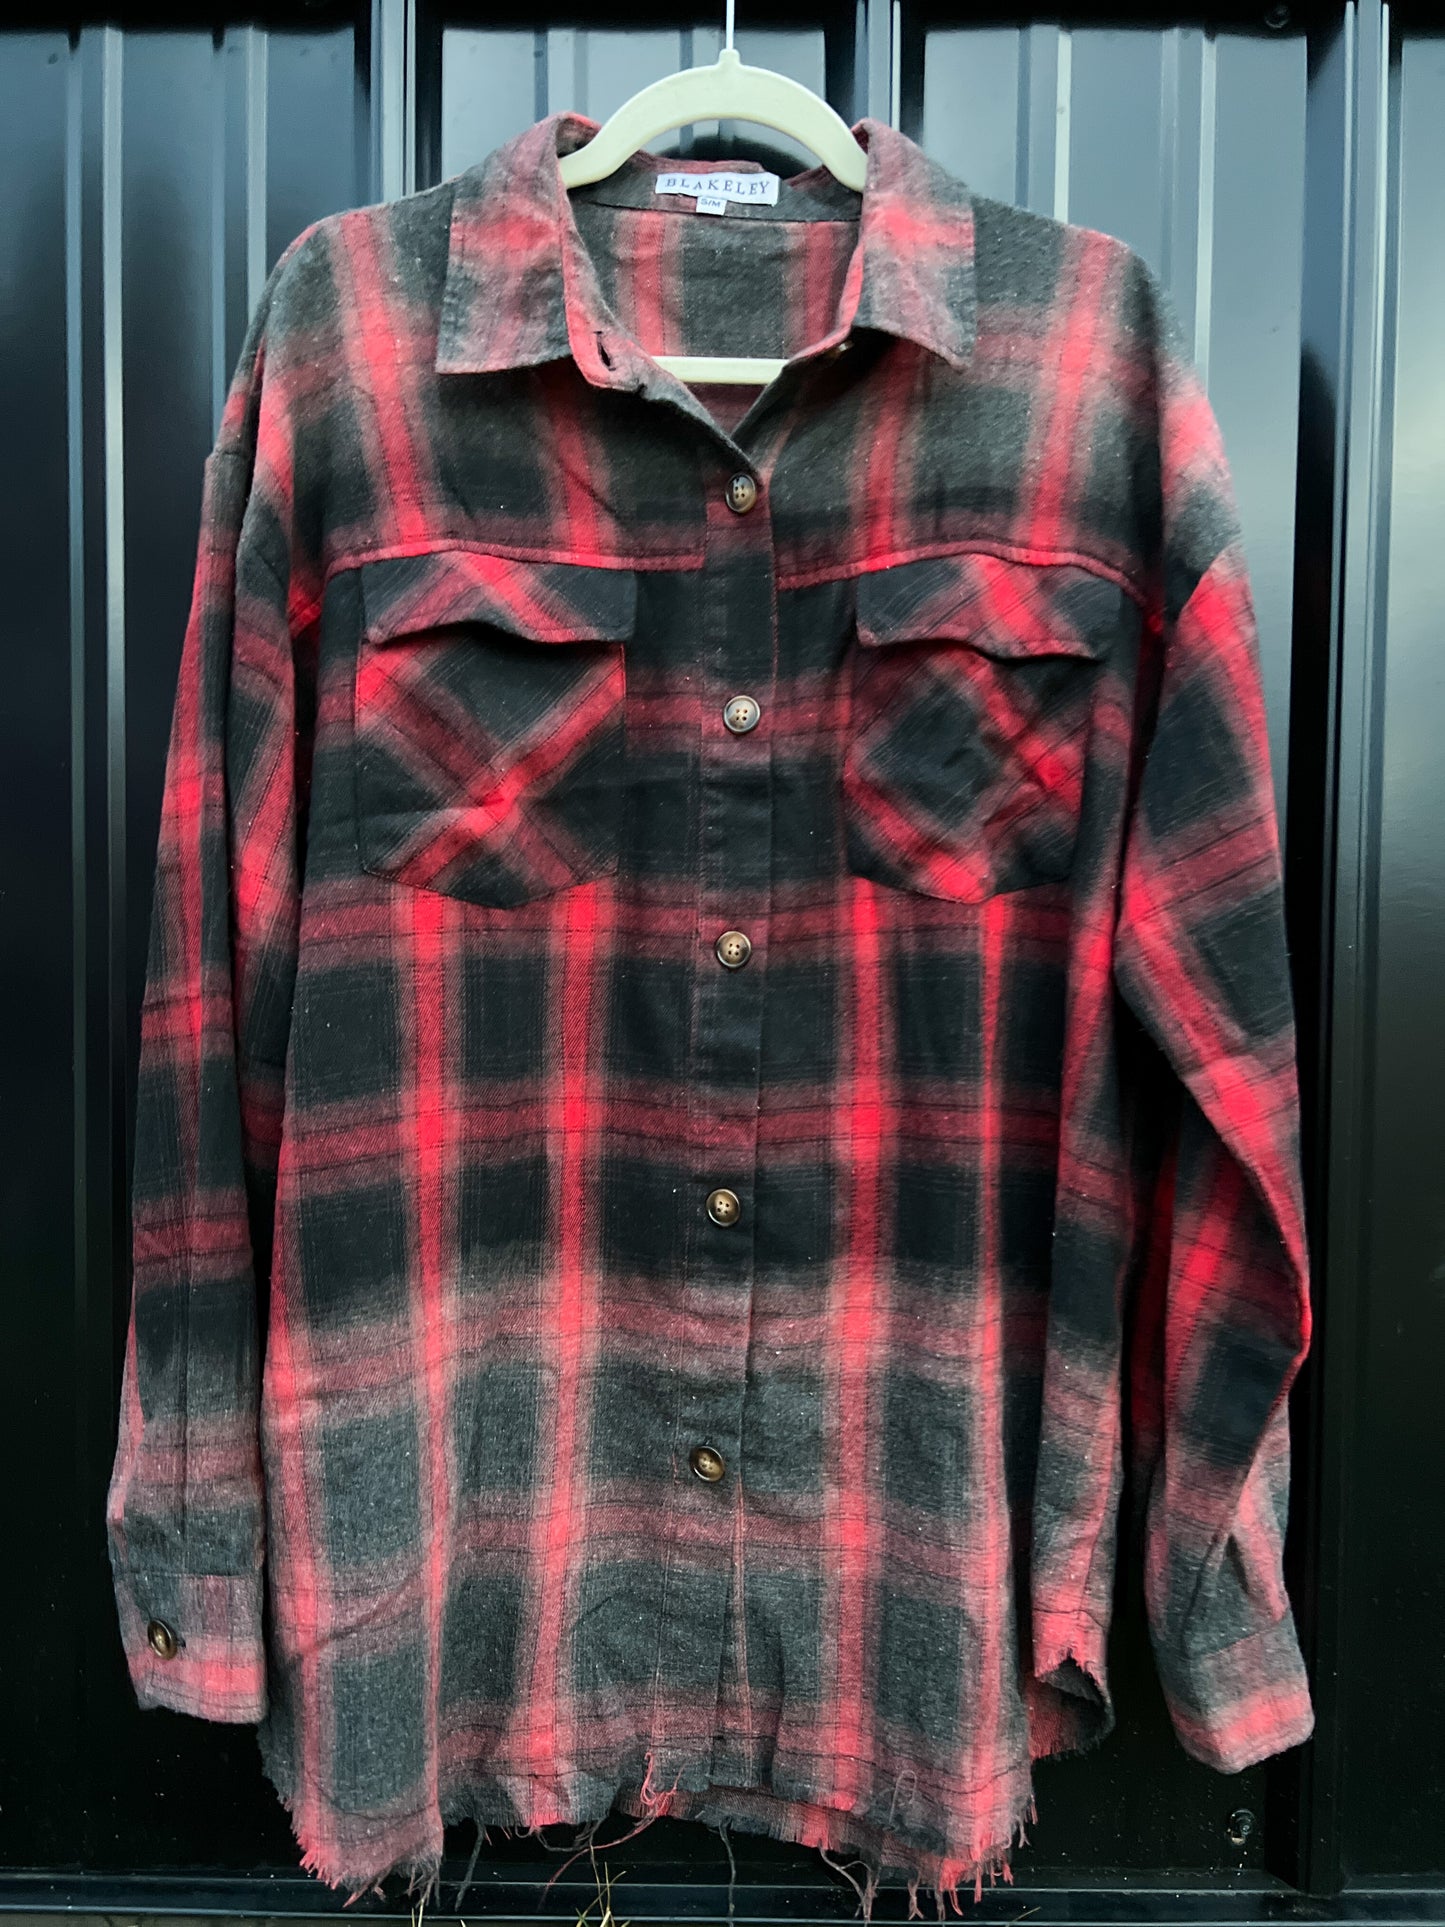 Faded Red Plaid Distressed Flannel – Calligraphy Creations In KY